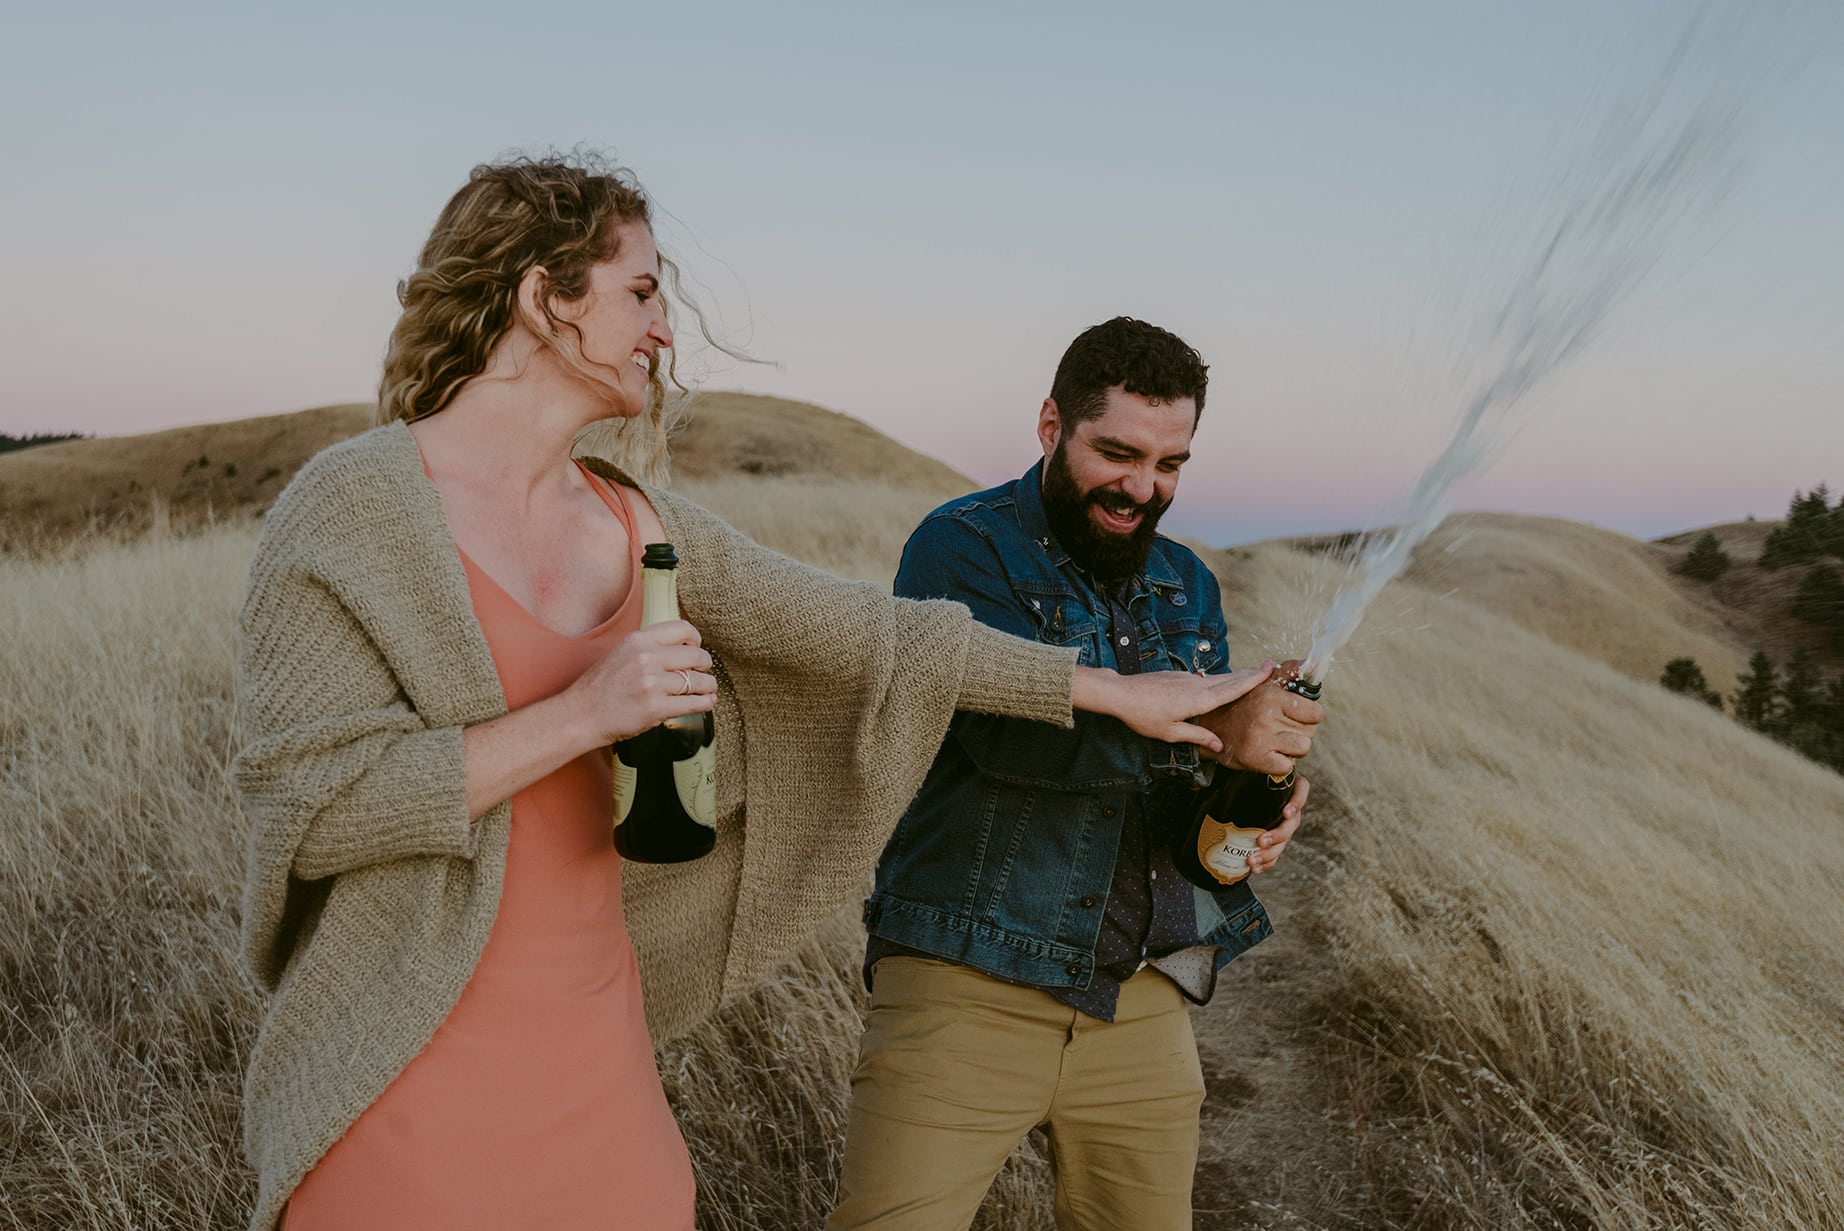 A Julie Pepin photo depicting a couple opening a bottle of champagne on grassy dunes. The champagne is shooting out of the bottle and the couple laughs